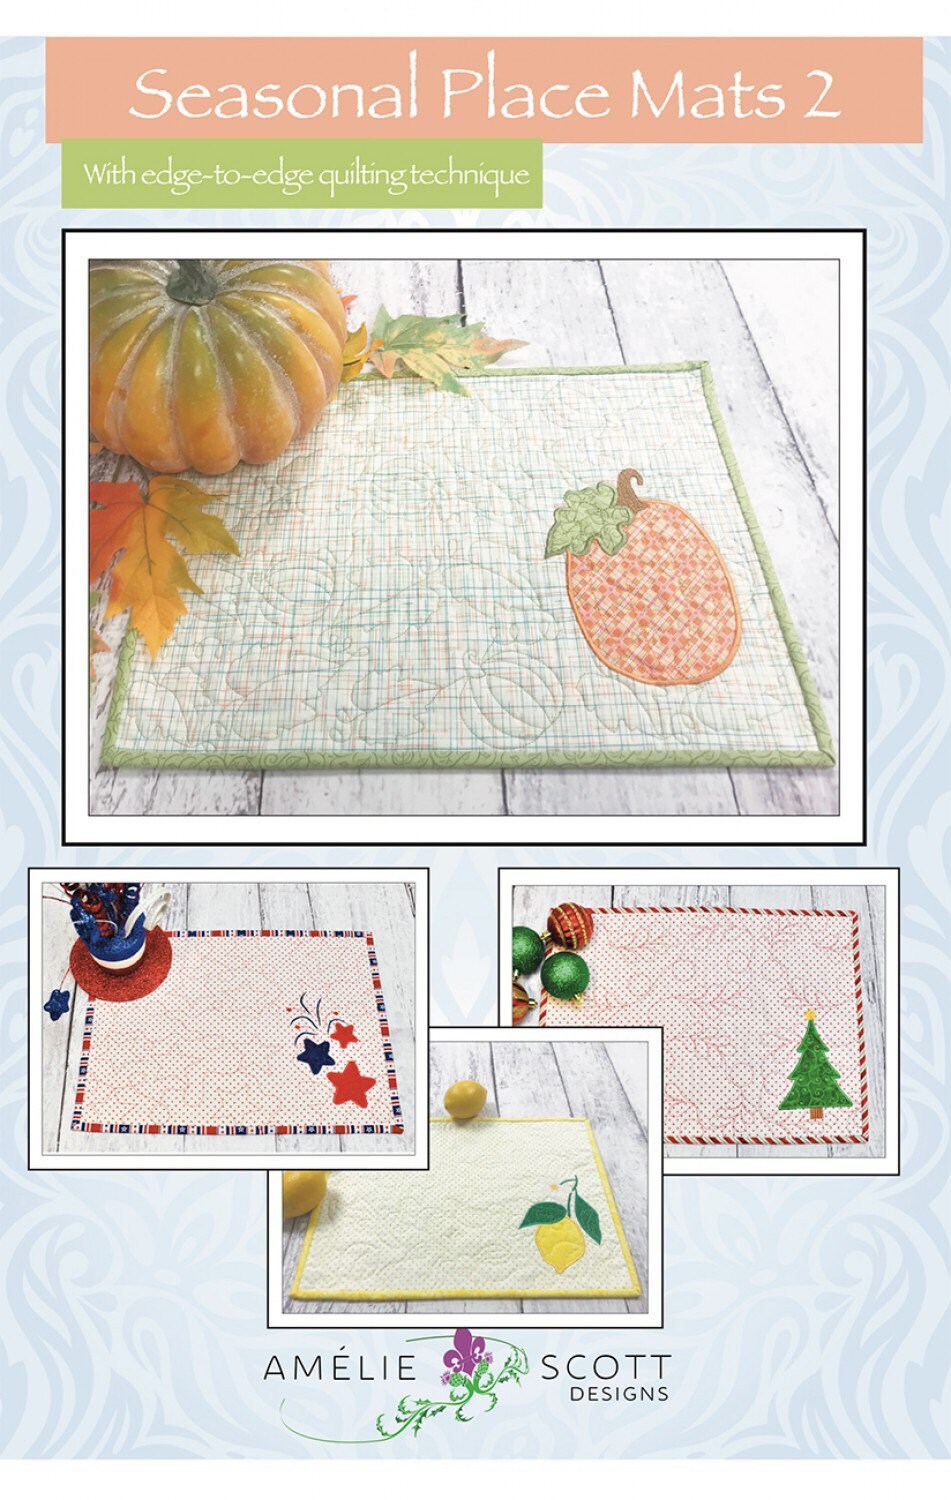 Seasonal Placemats 2 Pattern and Embroidery CD - Amelia Scott Designs - Christine Conner - In the Hoop Piecing, Appliquéing & Quilting